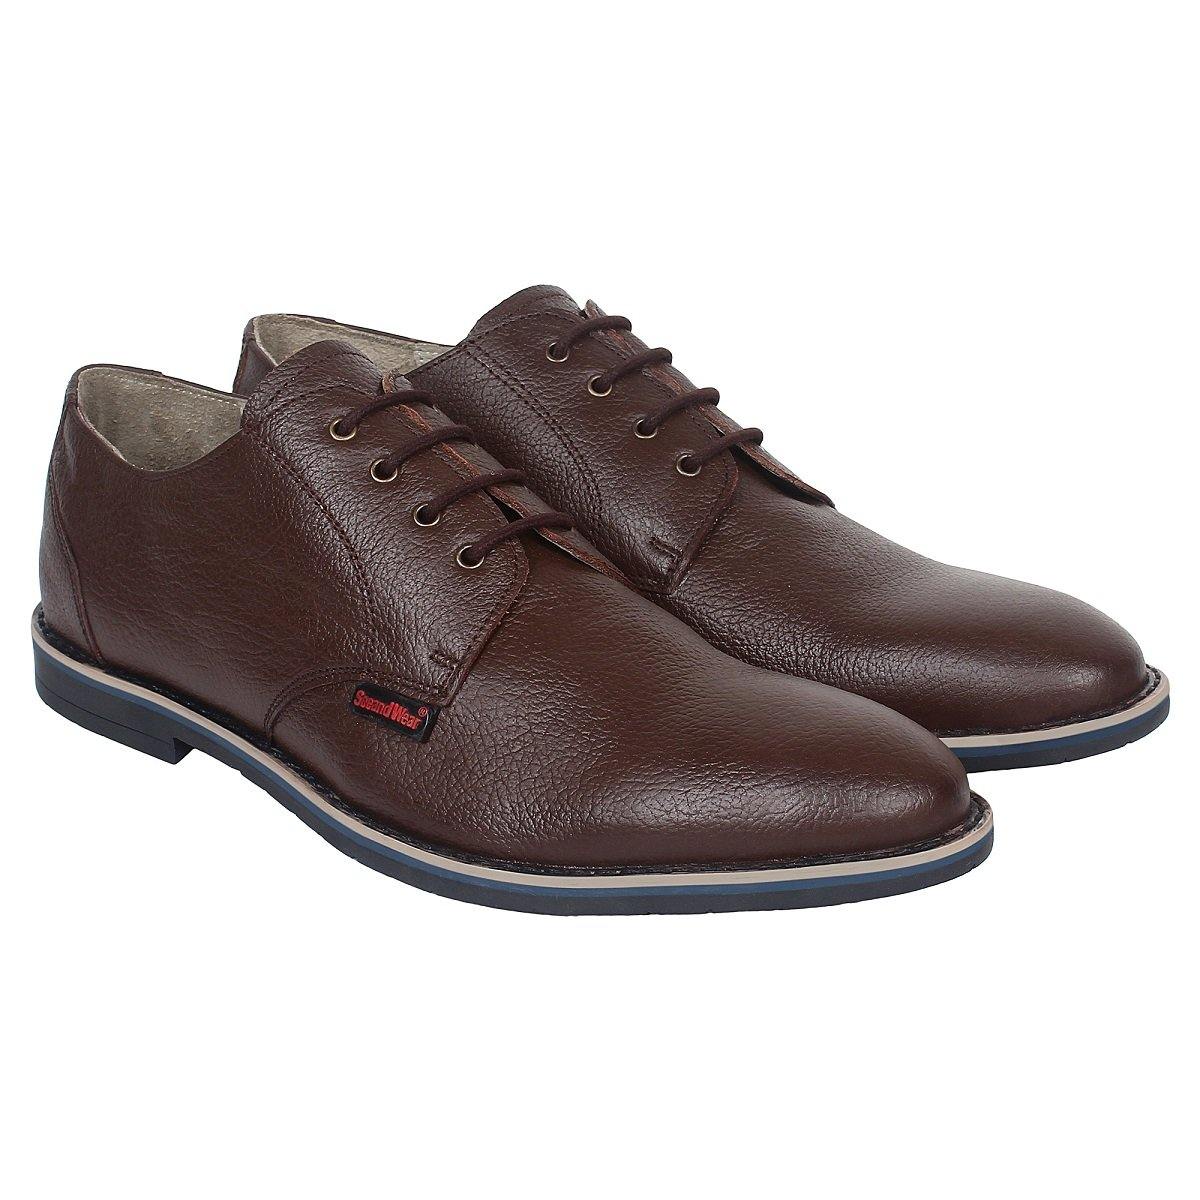 Explore Latest Range of Men's Casuals, Sneakers and Formal Footwear